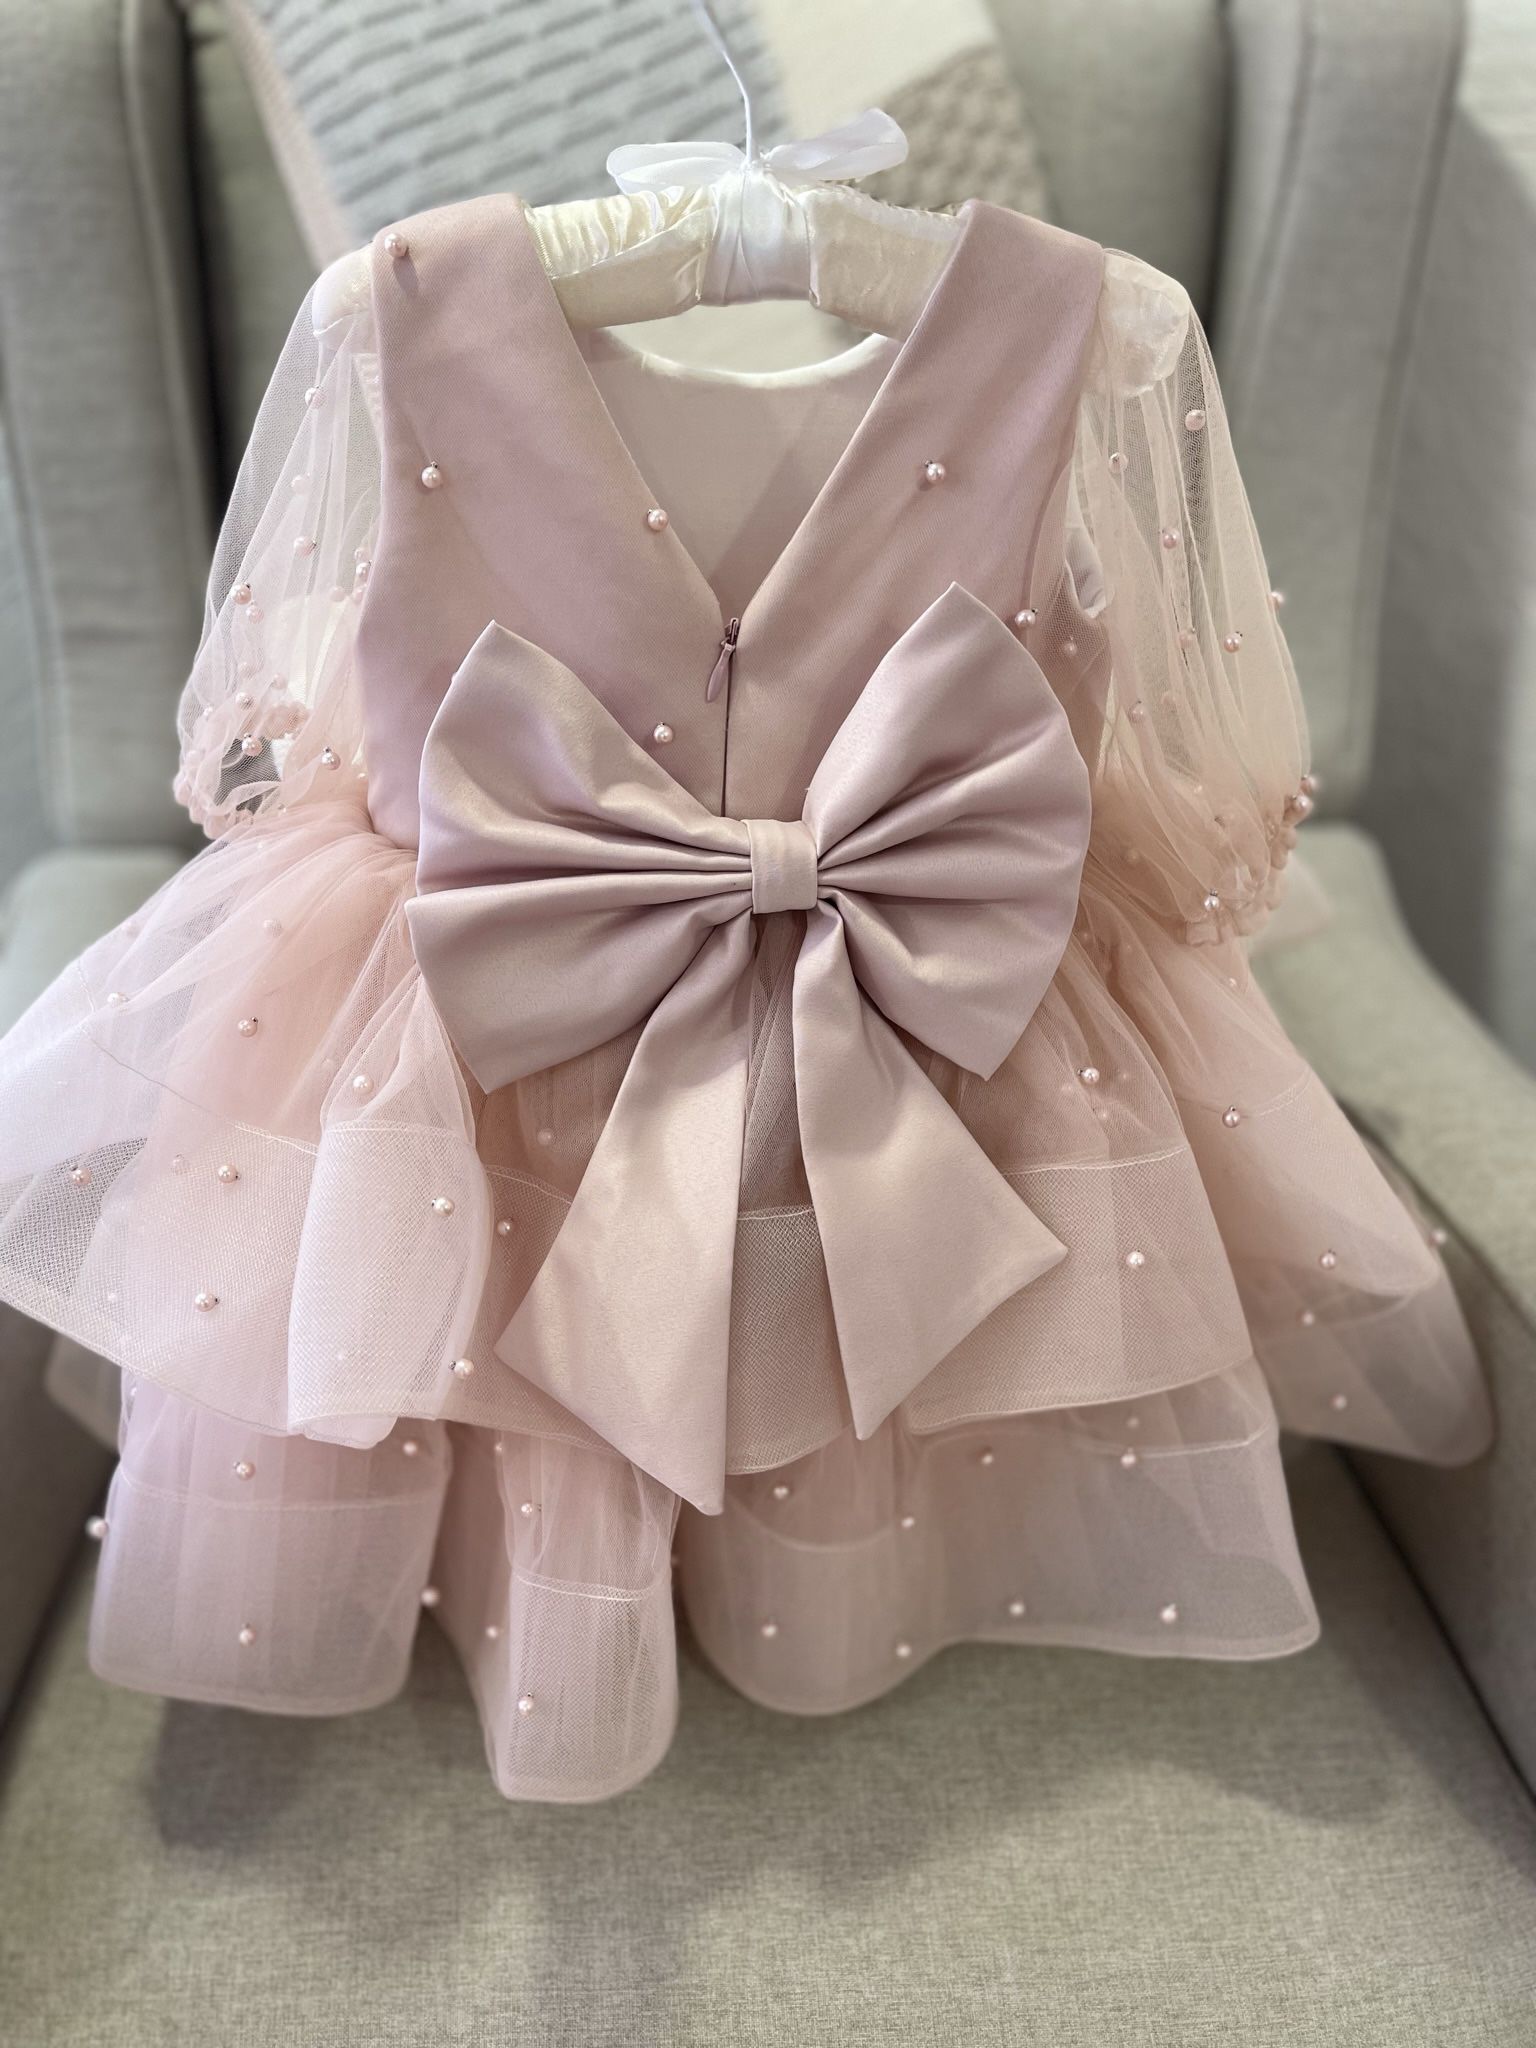 Baby Gown Dress 12-18 Months 